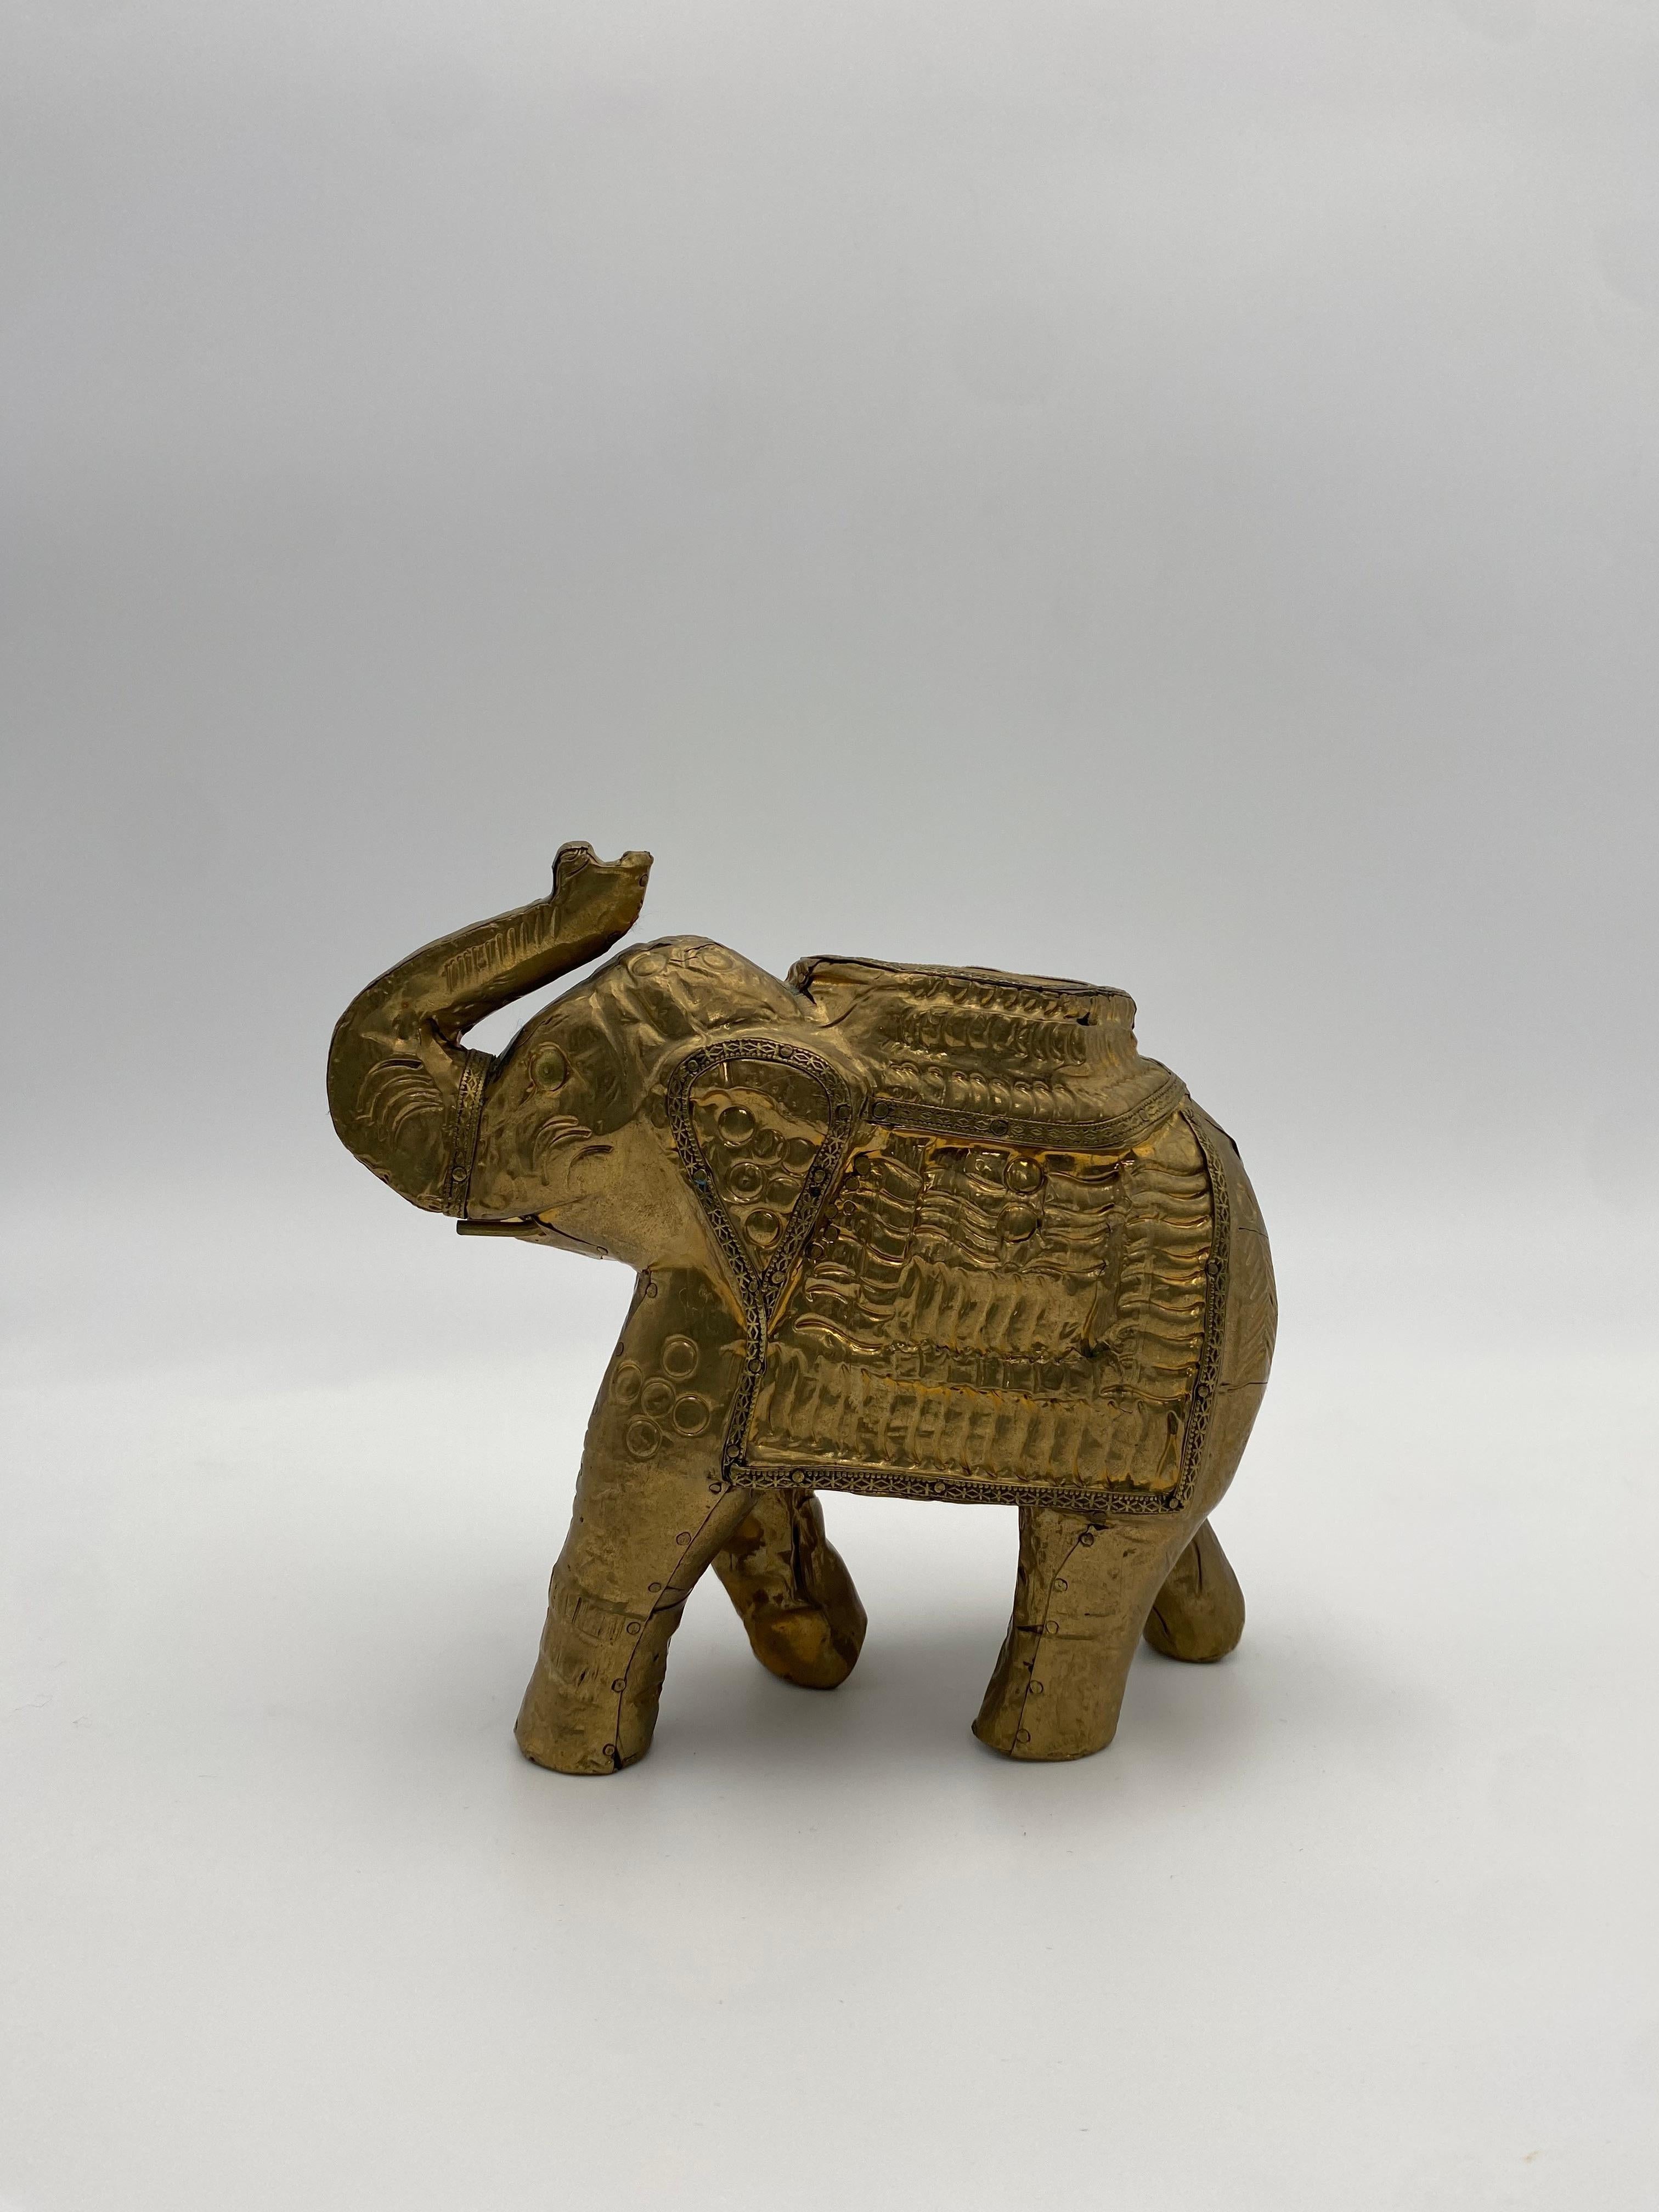 Handmade Brass Clad Elephant In Good Condition For Sale In Costa Mesa, CA